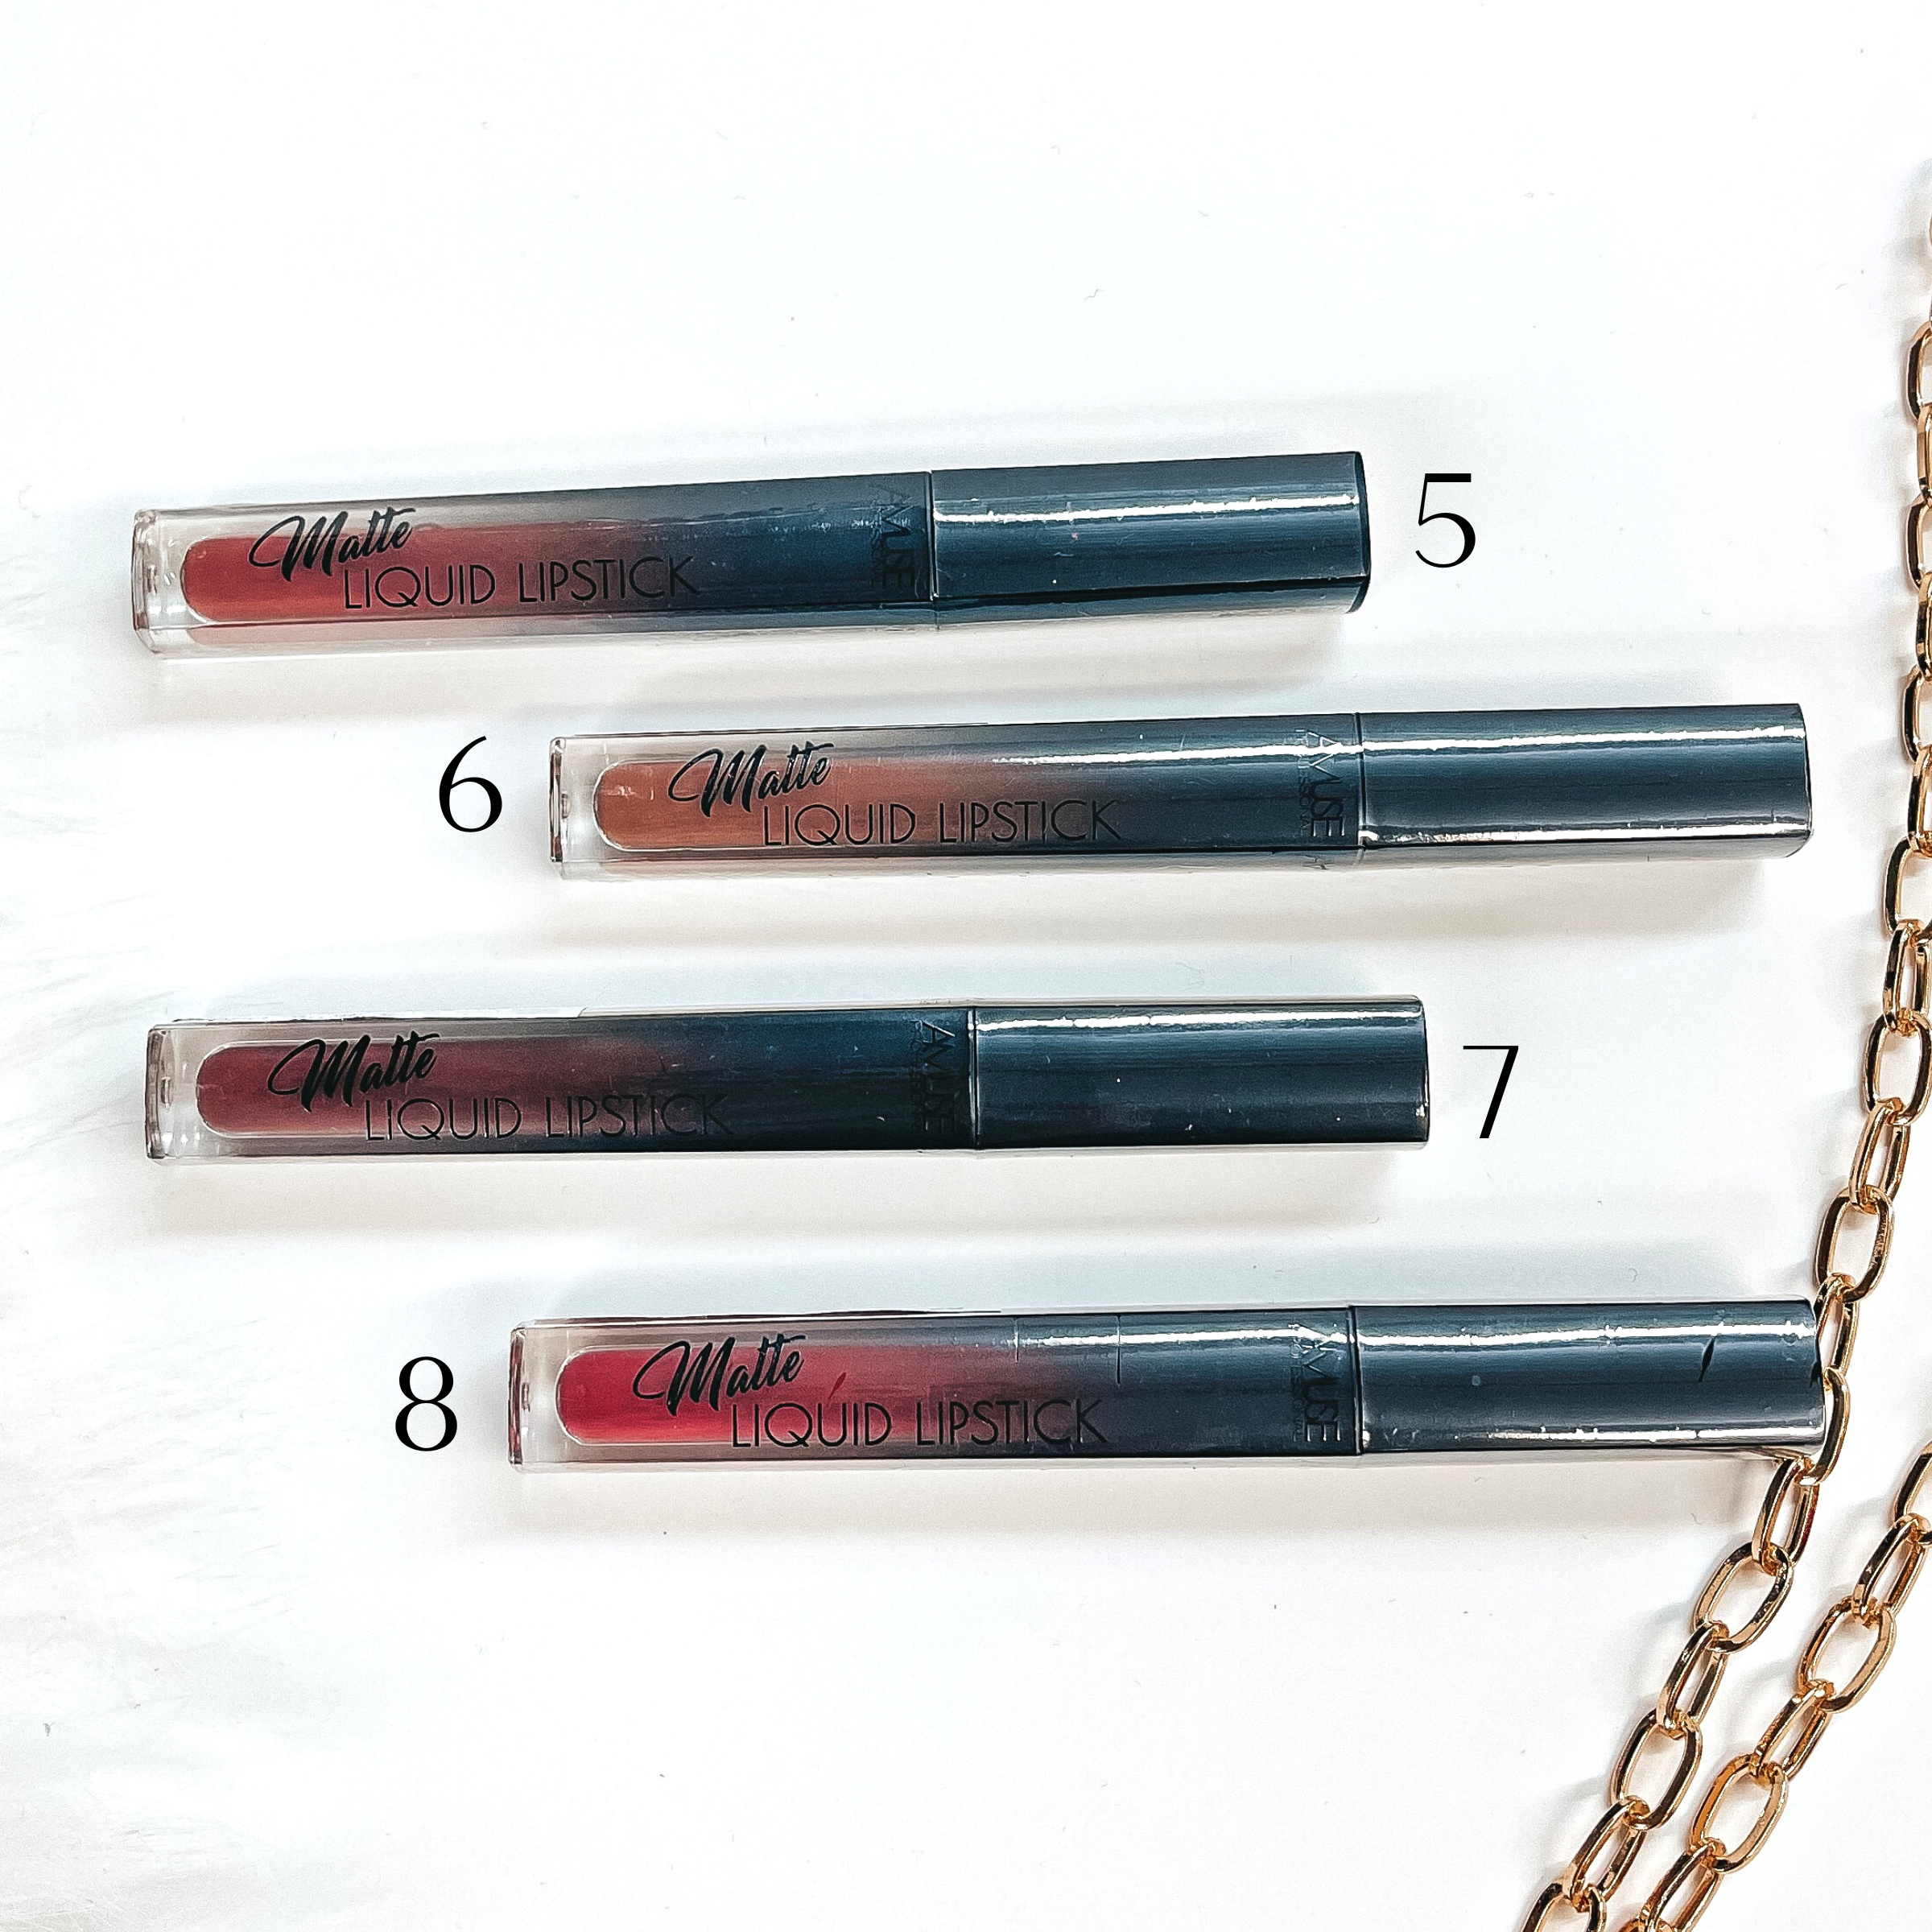 There are four liquid lipsticks in different shades of dark-nudes/red laying on a white  background with white fur and a gold link chain in the side as decor.